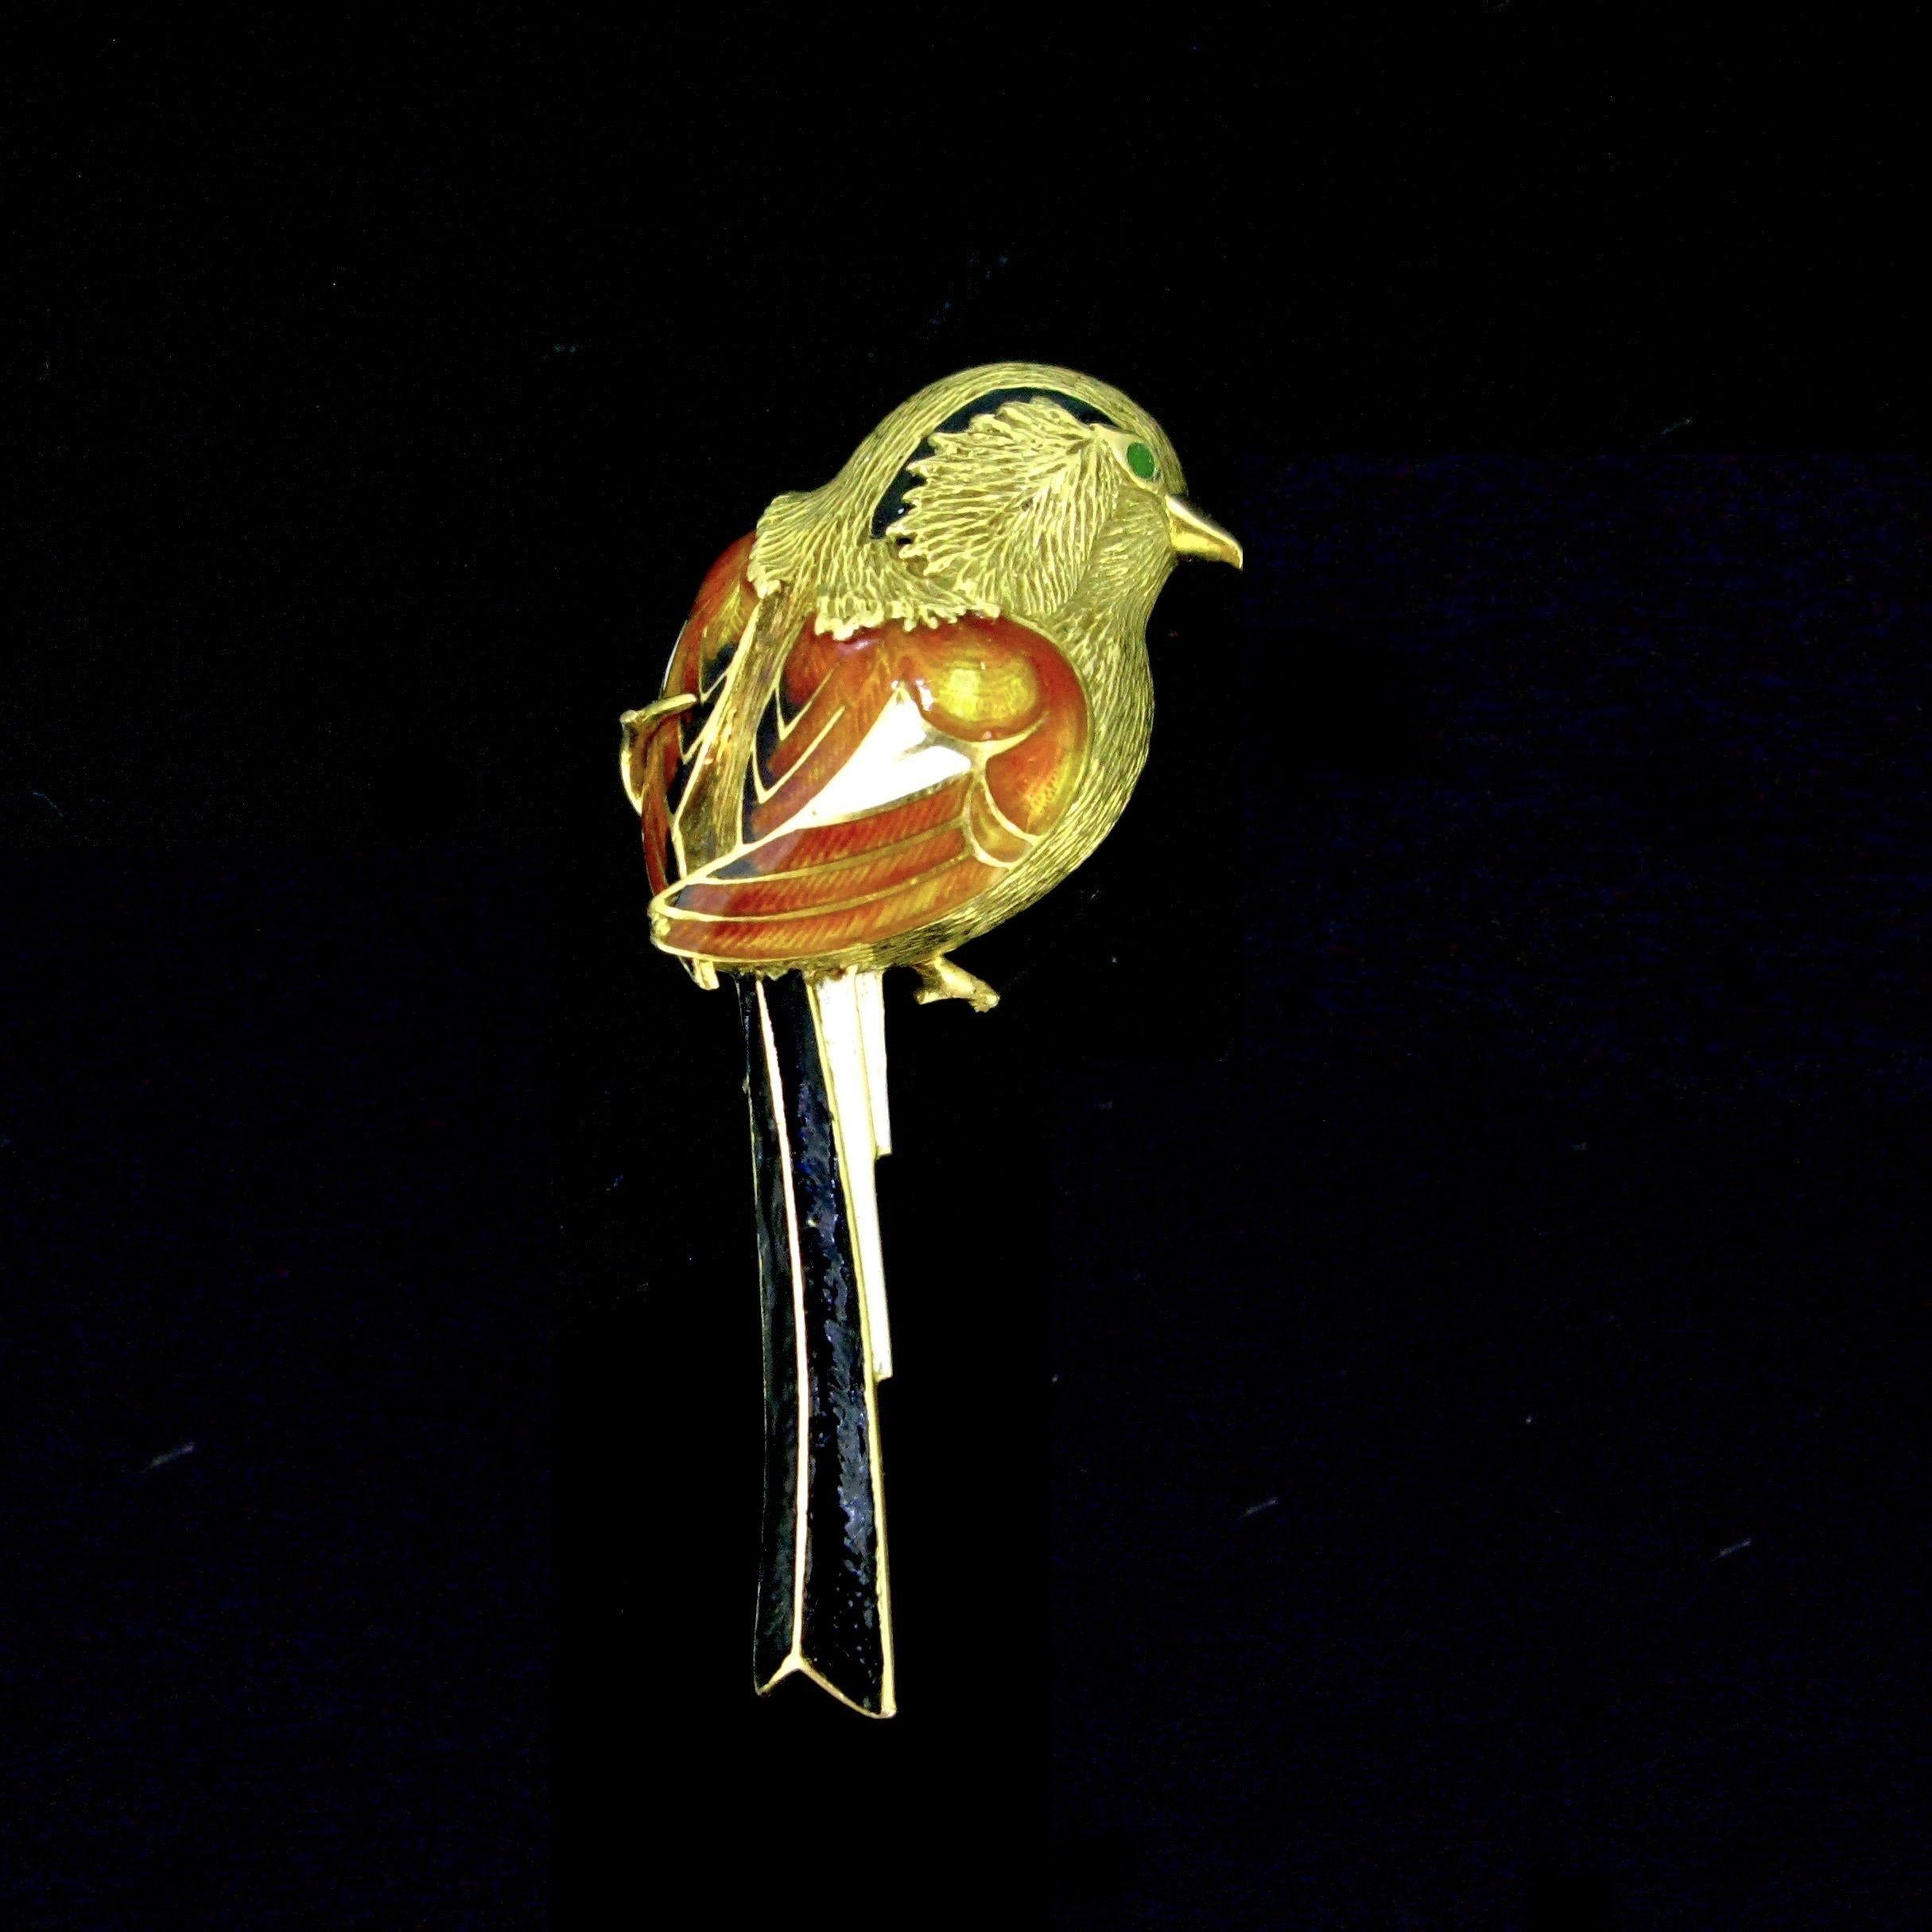 Weight: 14.15gr

Metal: 18kt yellow gold
Enamel

Condition: Very Good
(repairs on the enamel)

Hallmarks: French, eagle’s head

Comments: This lovely brooch features a realistic bird on a branch. The eye is adorned with a green stone and the